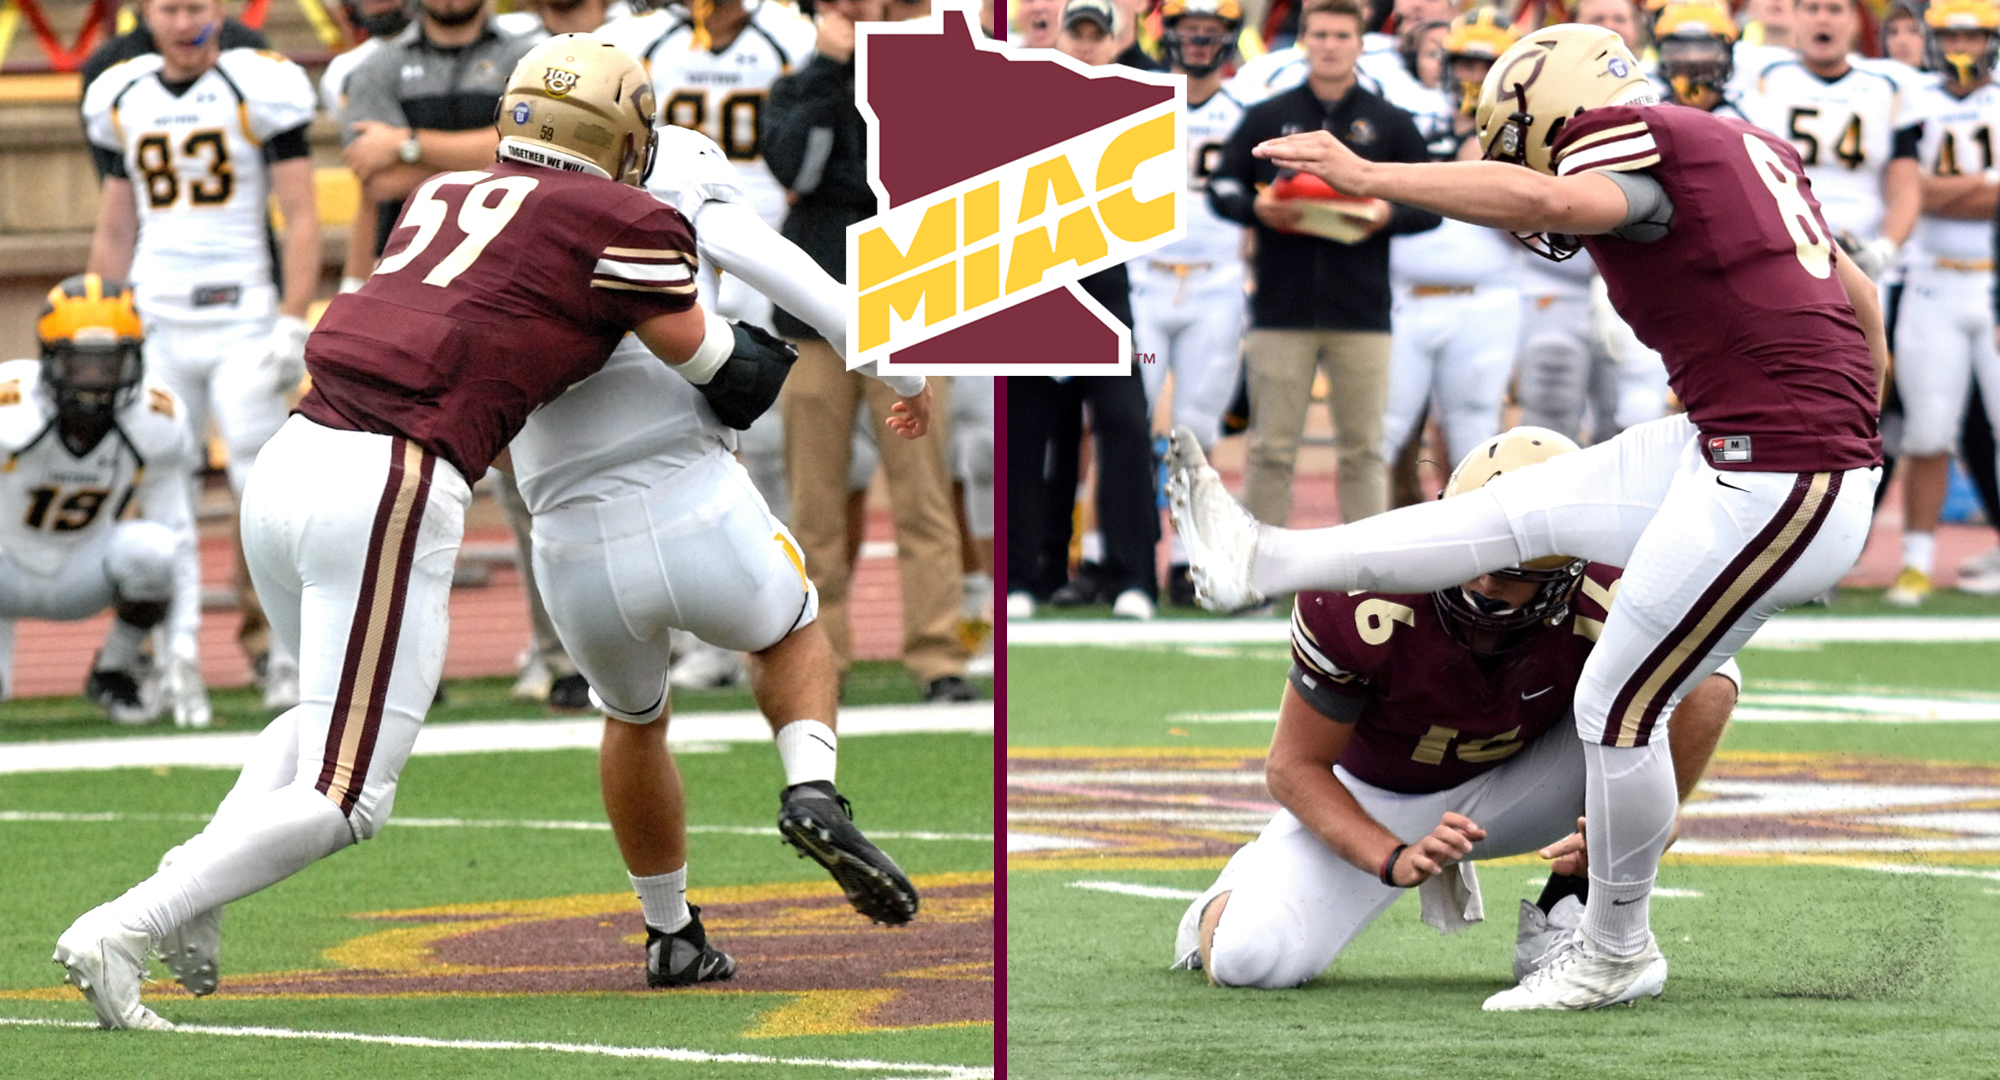 Alex Berg (L) and Tony Kostelecky both earned MIAC Player of the Week honors.